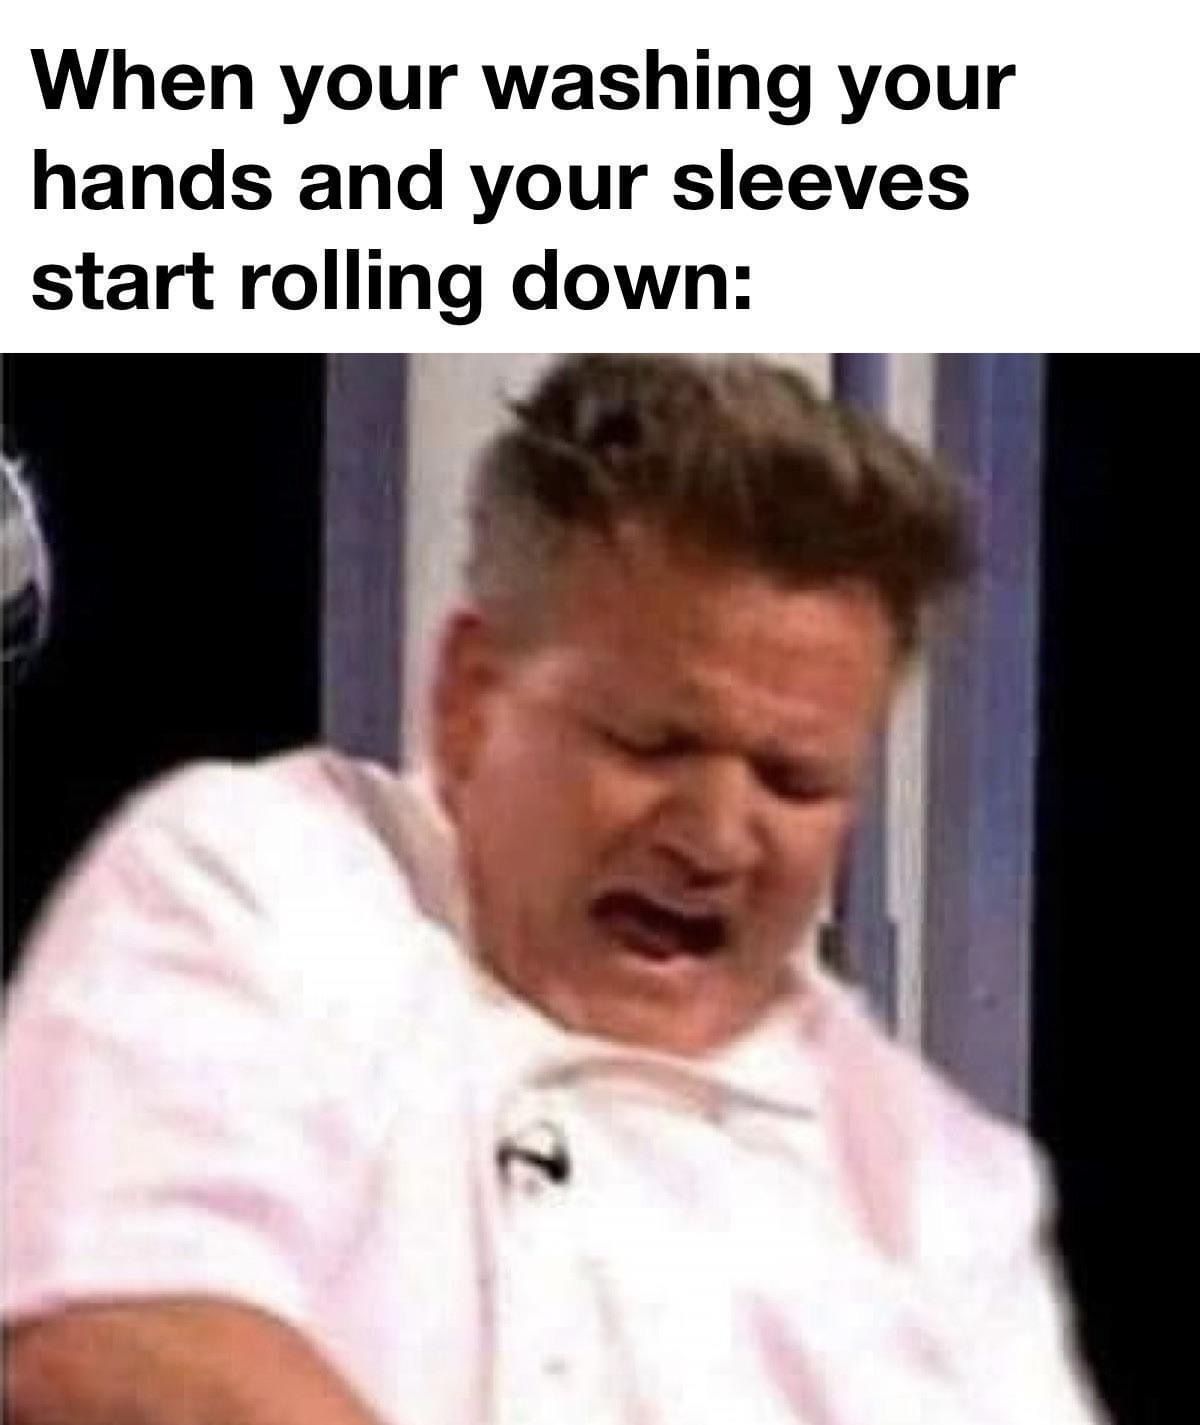 gordon ramsay meme - When your washing your hands and your sleeves start rolling down